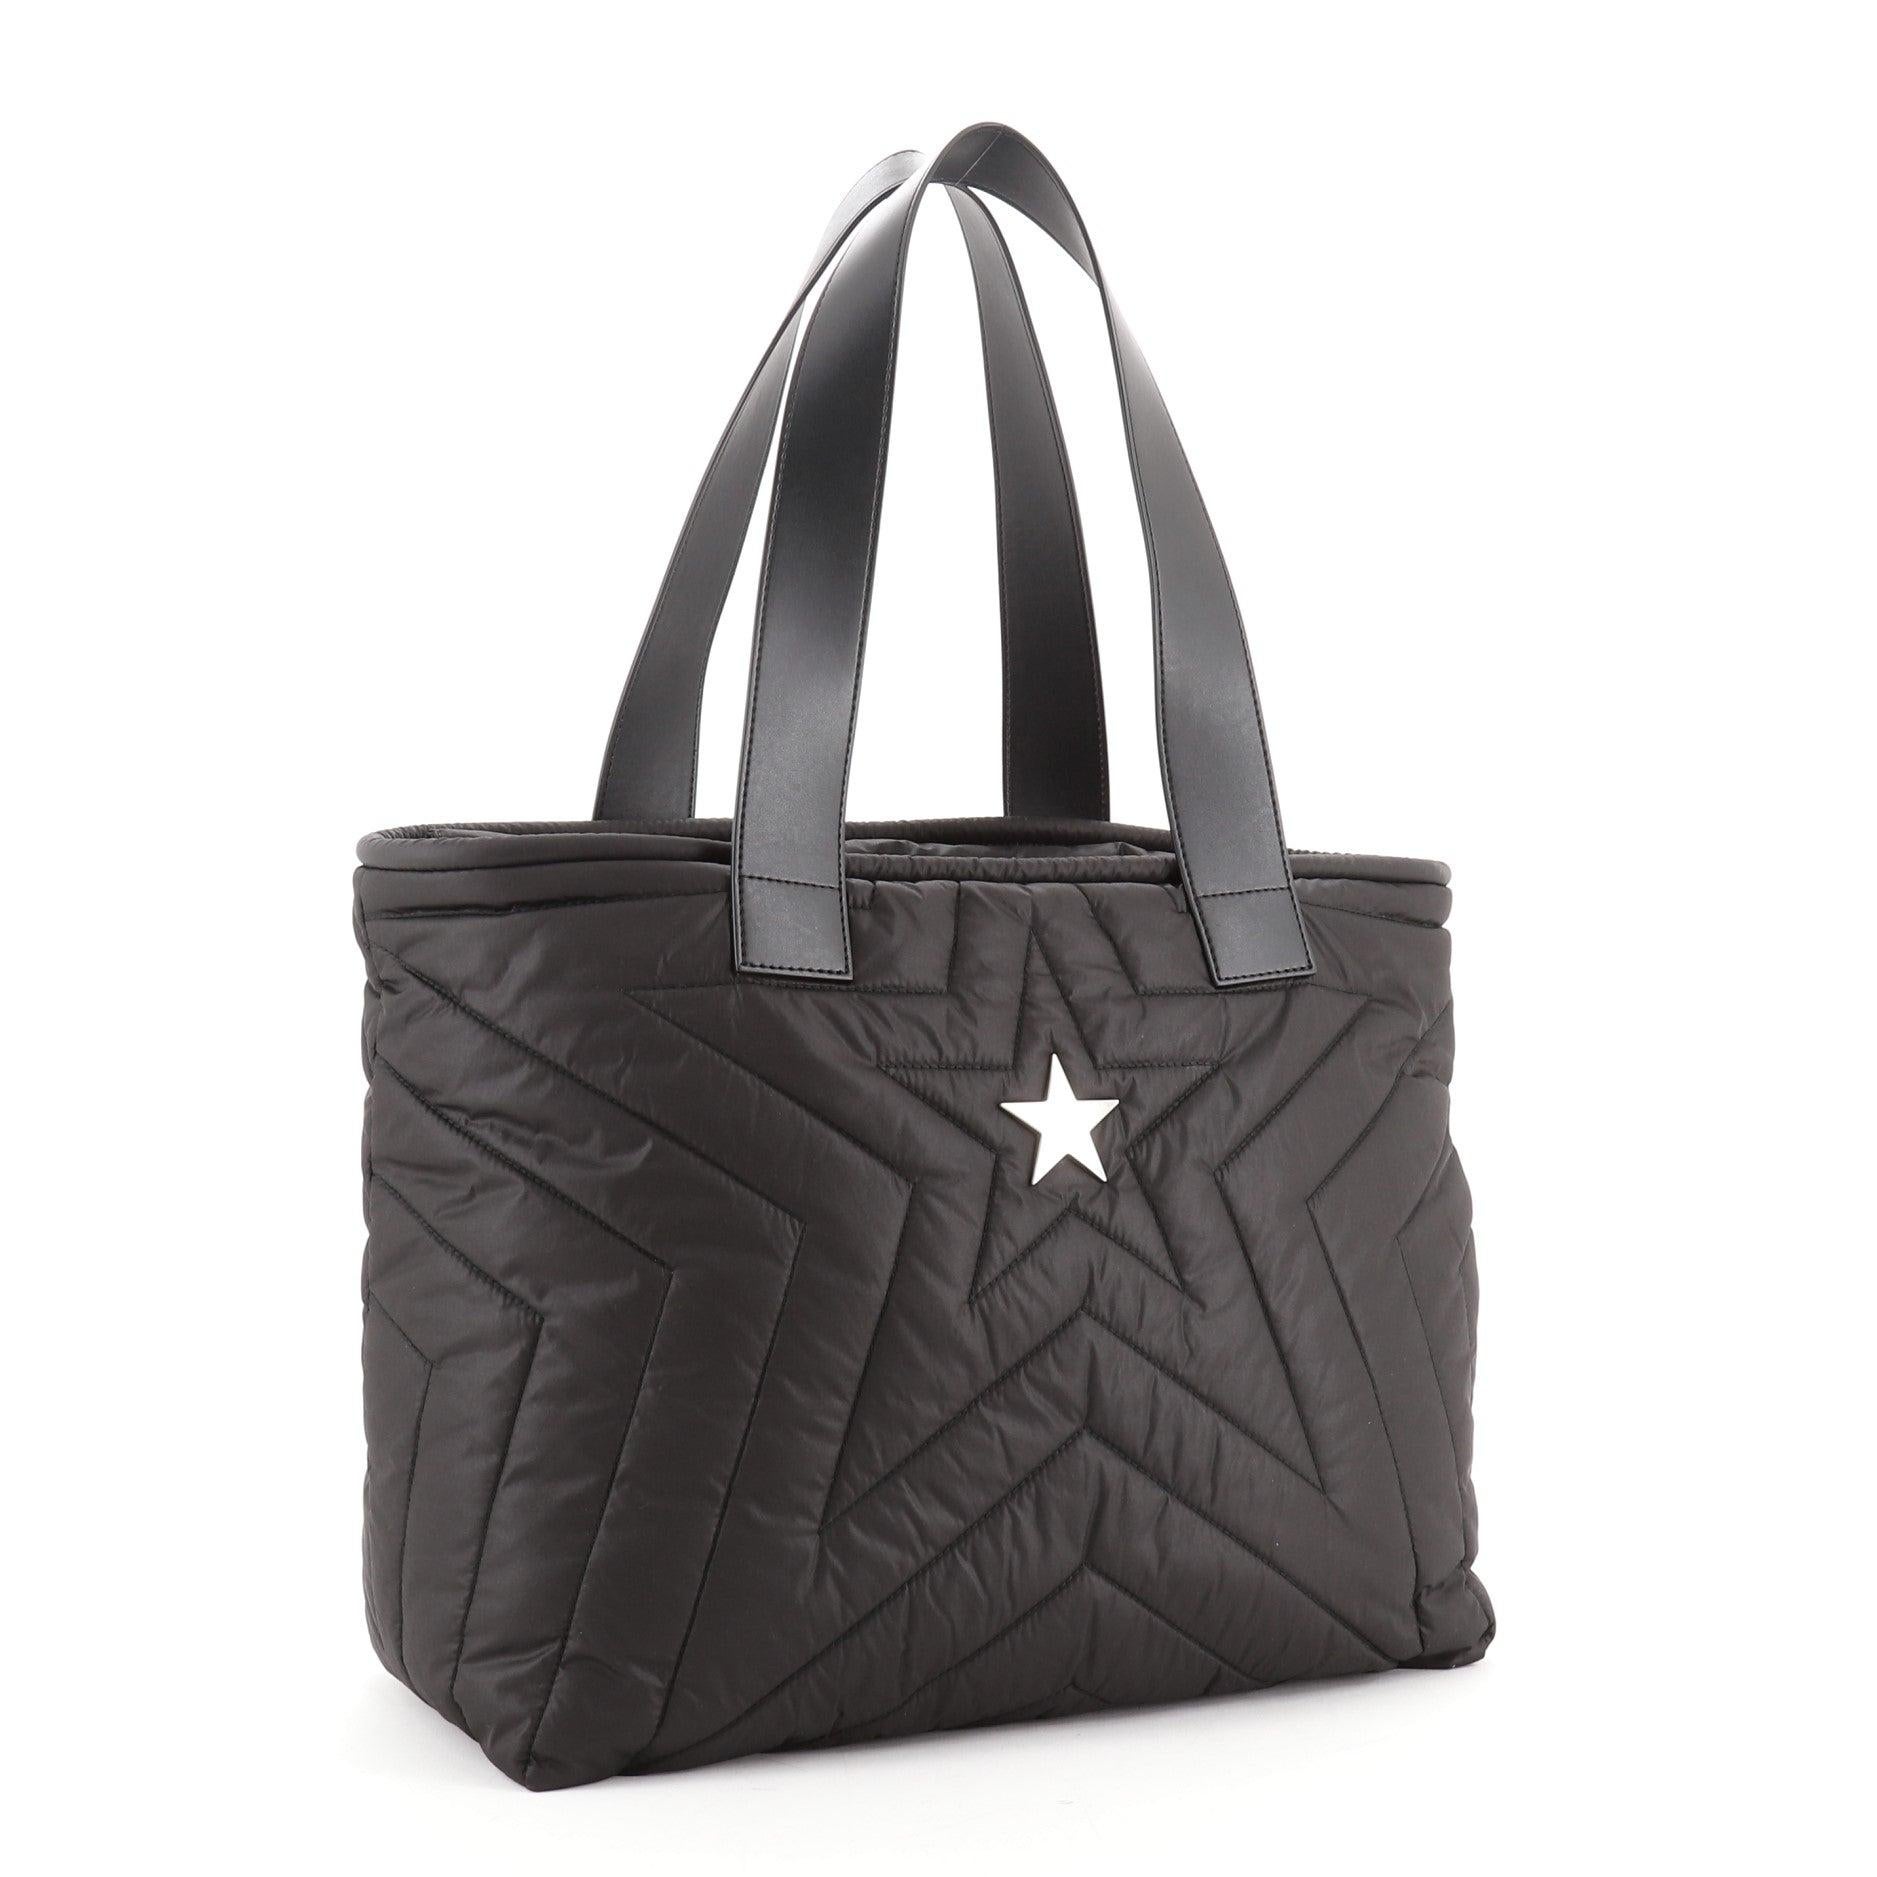 Stella McCartney Stella Star Tote Quilted Nylon Large
Black

Condition Details: Light wear on exterior and in interior, minor scuffs on handles, scratches on hardware.

52313MSC

Height 13